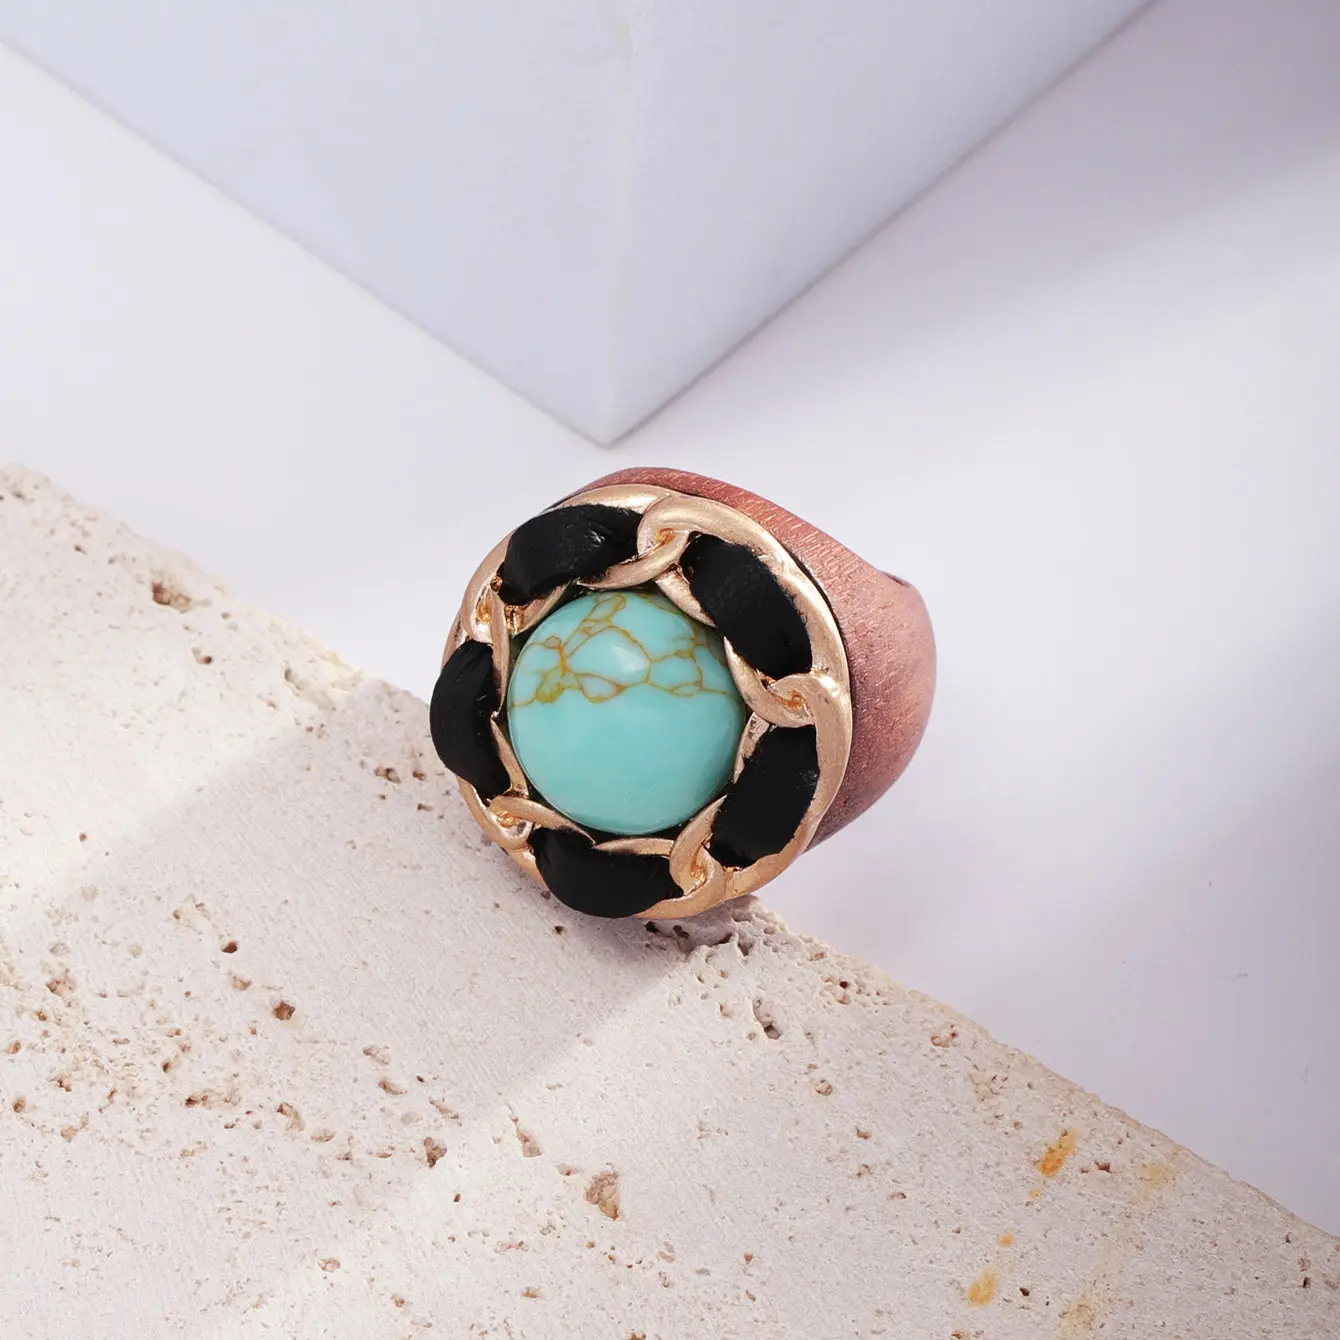 Woying European And American Style Jewelry Wood Round Alloy Leather Rope Fashion Turquoise Ring Woman